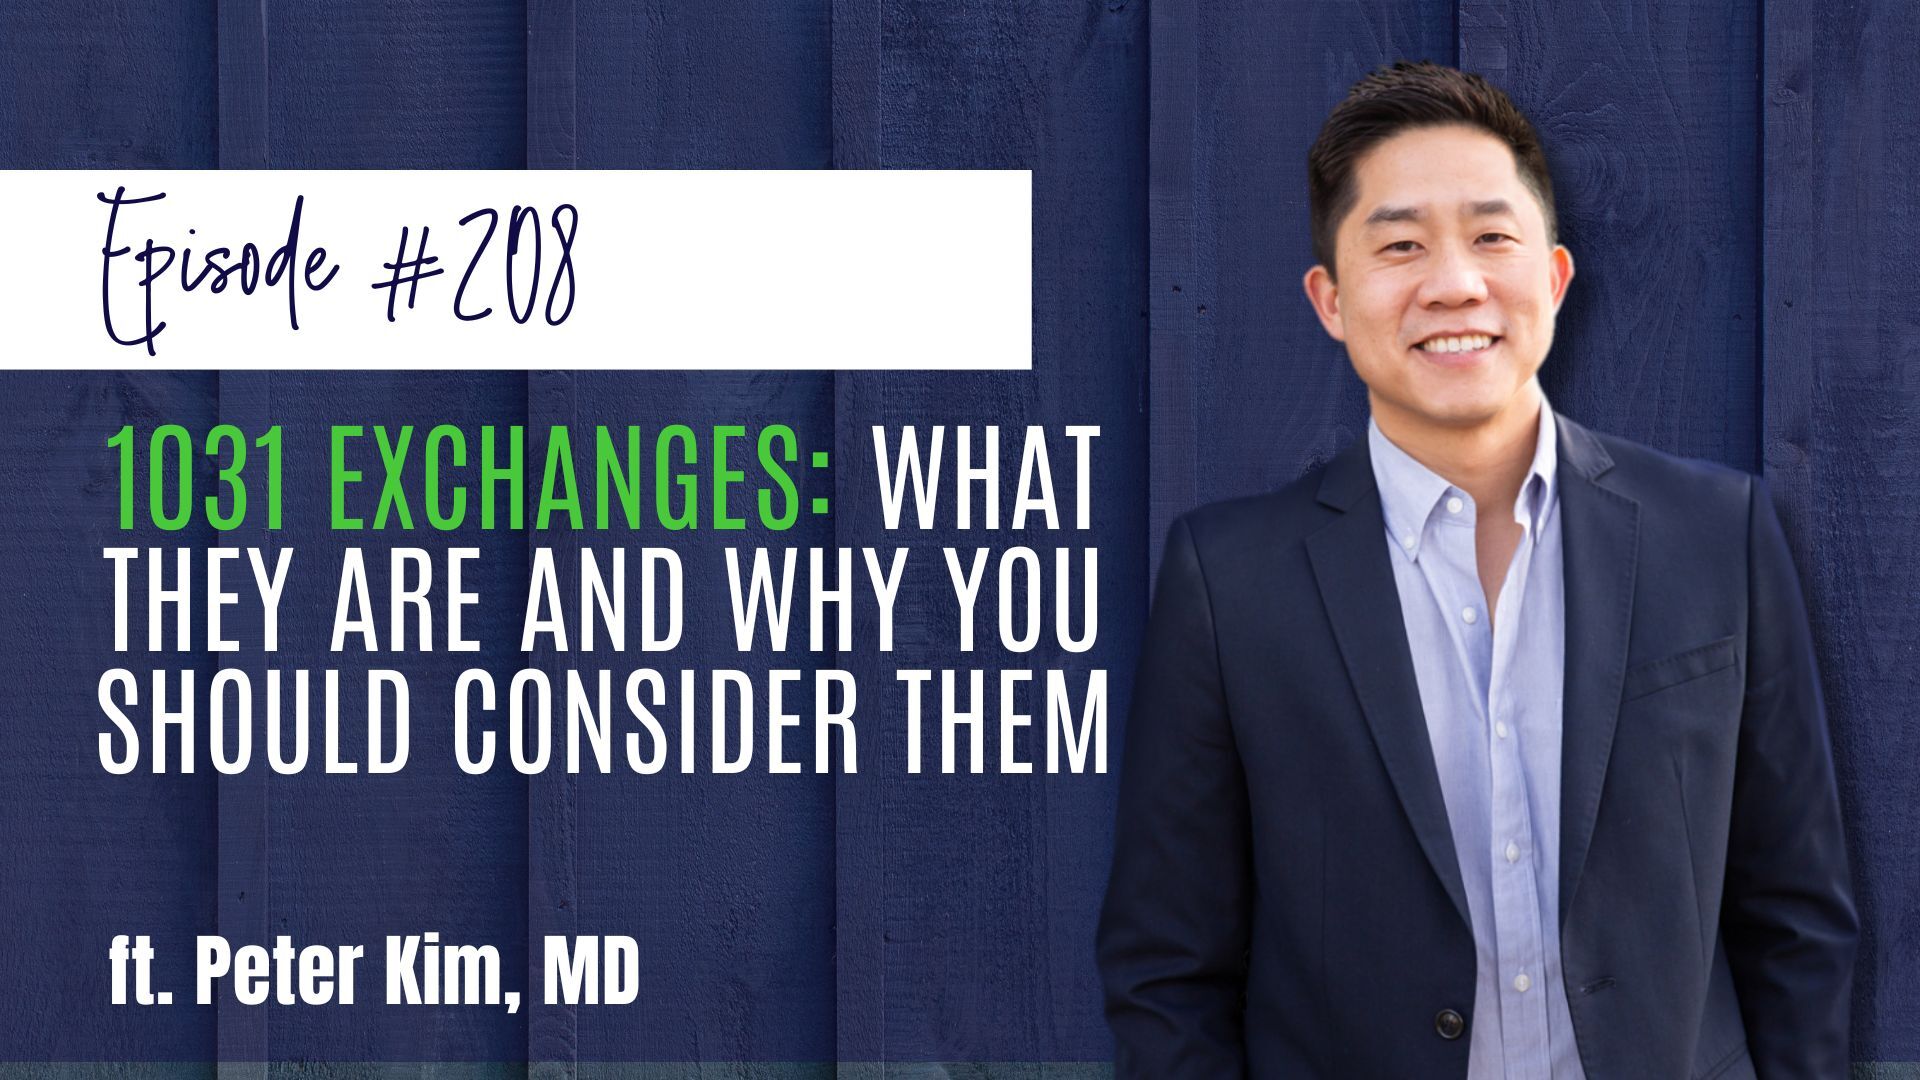 #208 1031 Exchanges What They Are and Why You Should Consider Them ft. Dr. Peter Kim